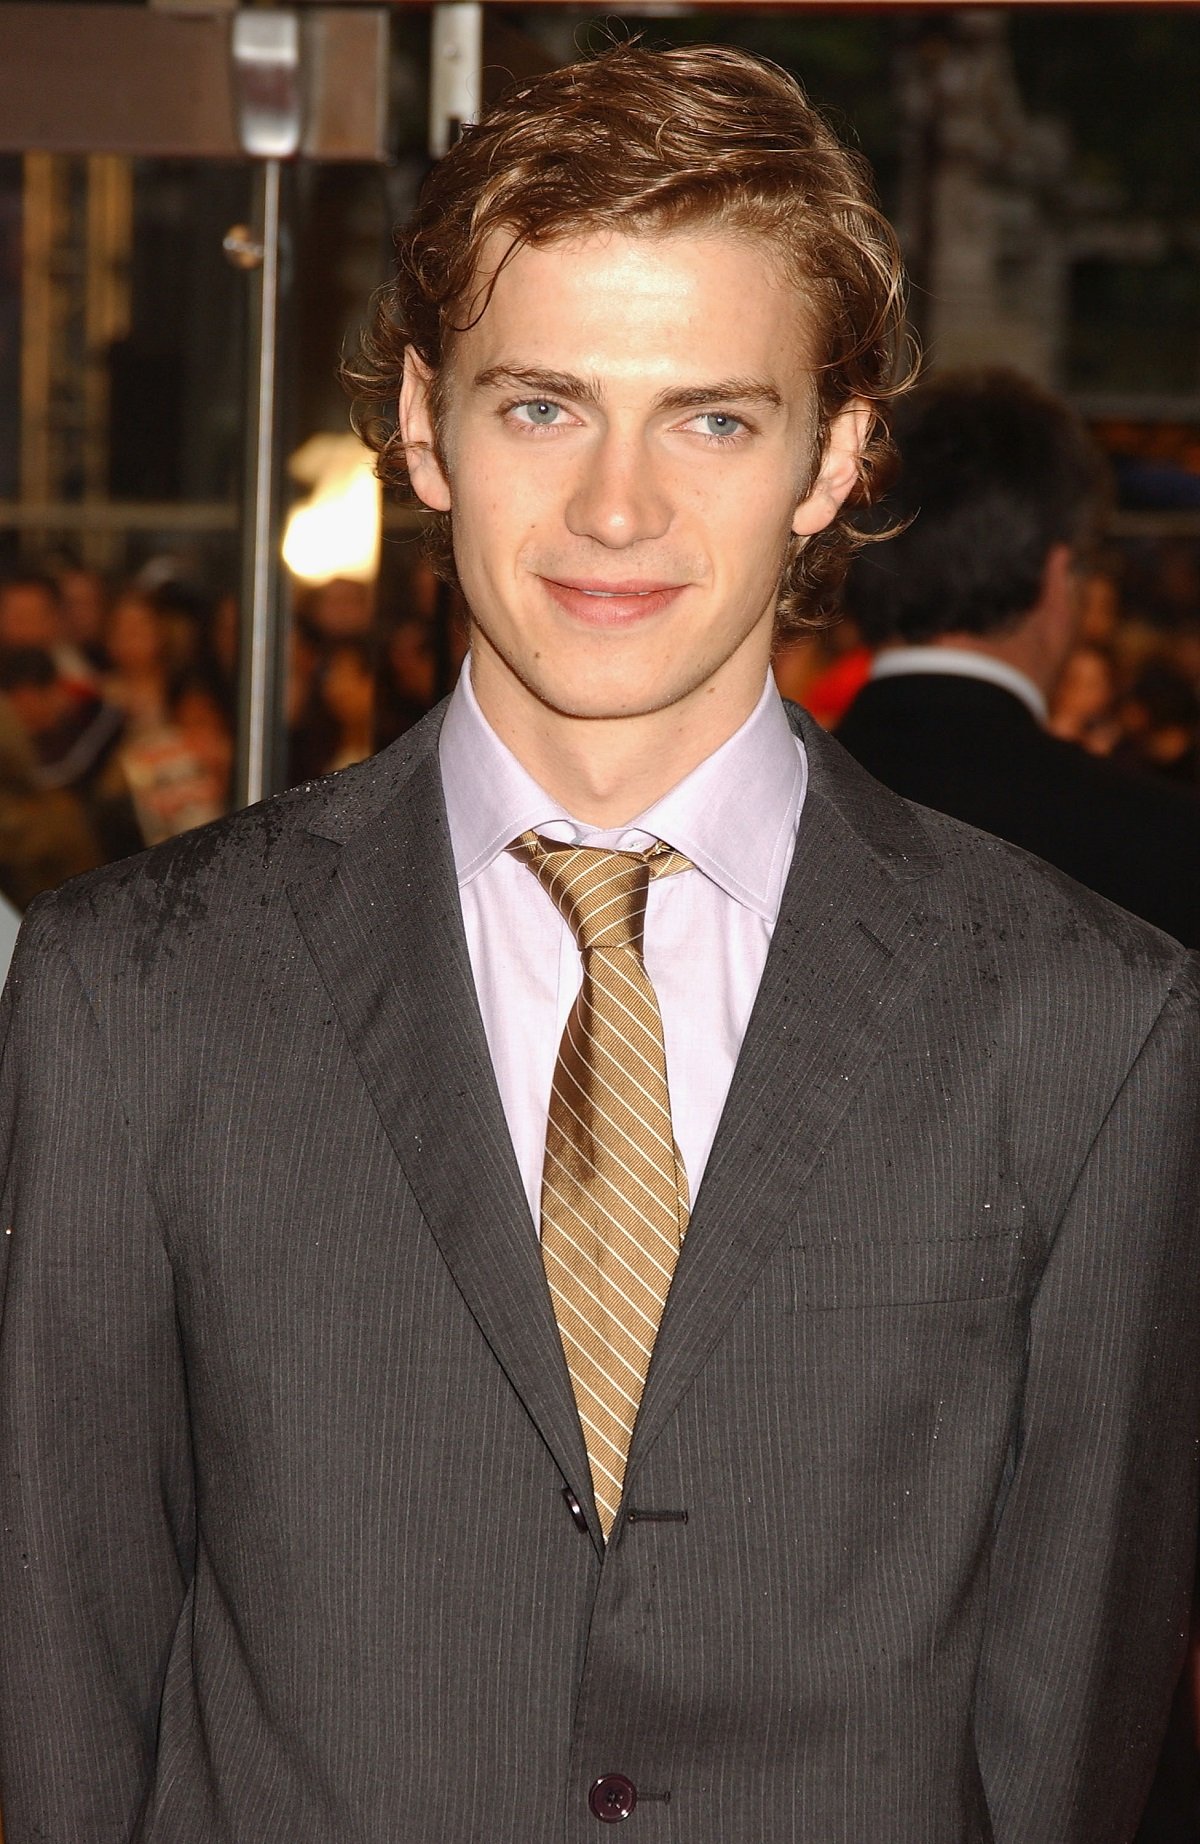 Hayden Christensen on May 16, 2005, in London. | Source: Getty Images 